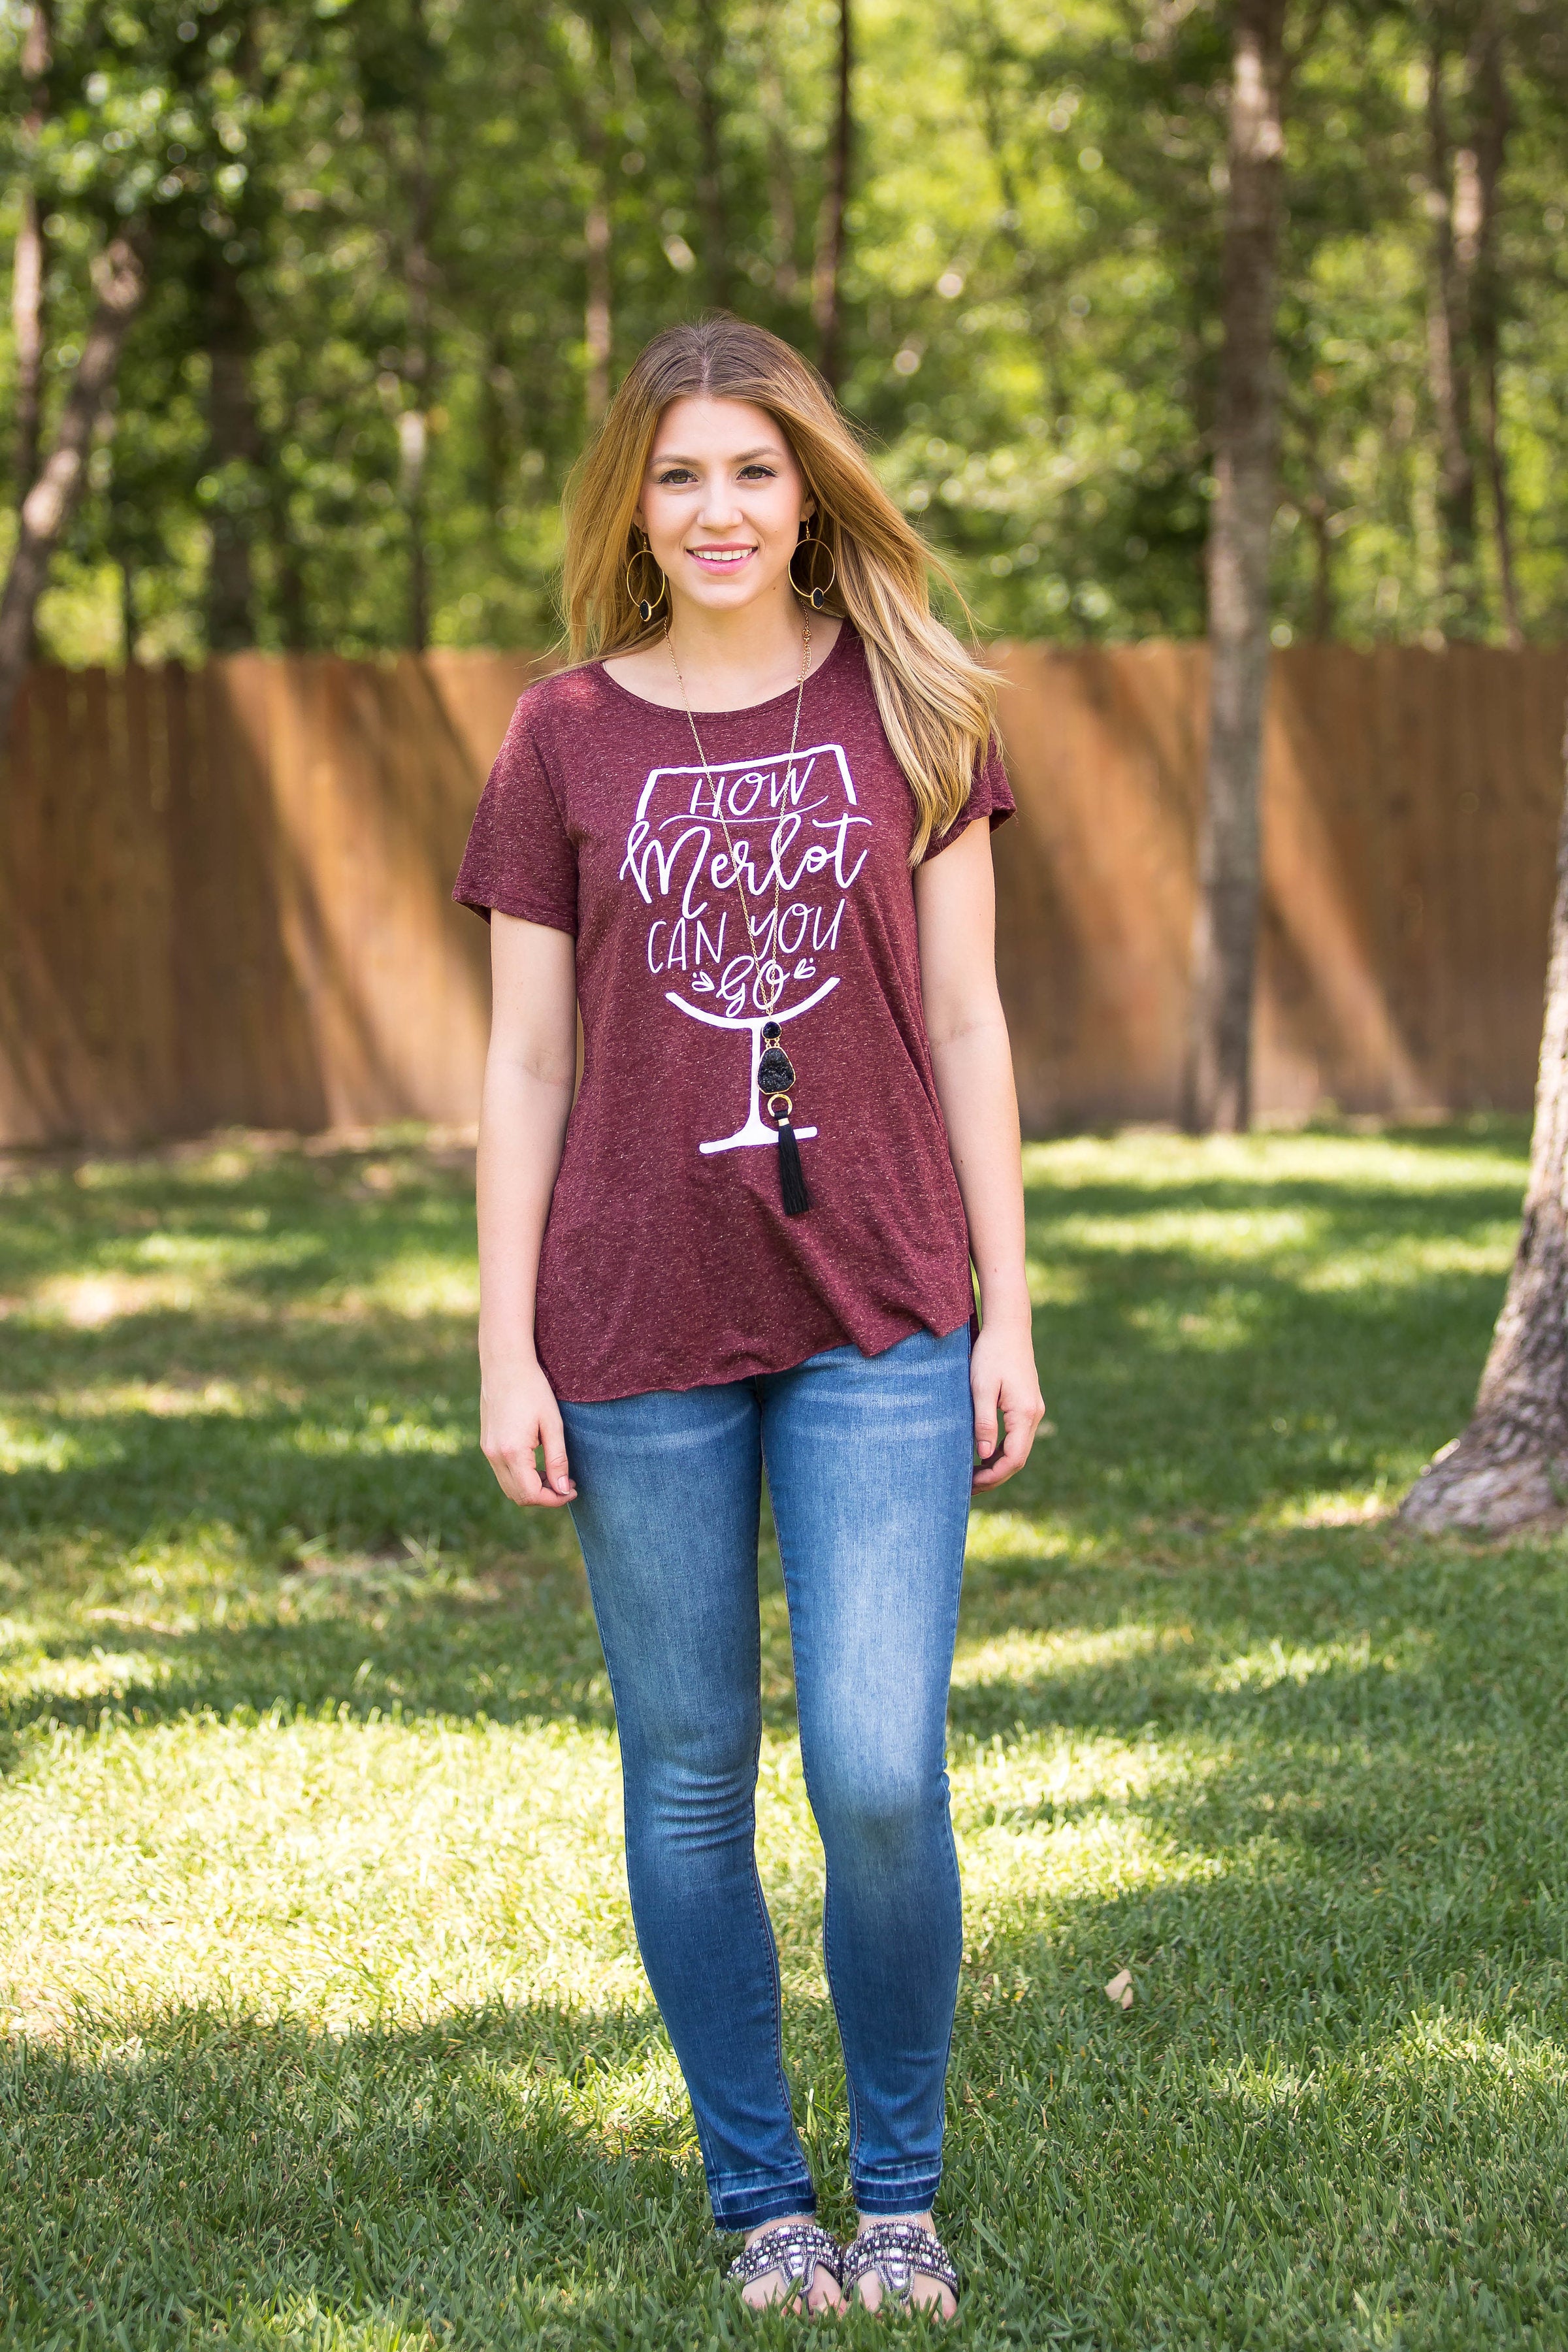 Last Chance Size Small | How Merlot Can You Go Short Sleeve Tee Shirt - Giddy Up Glamour Boutique